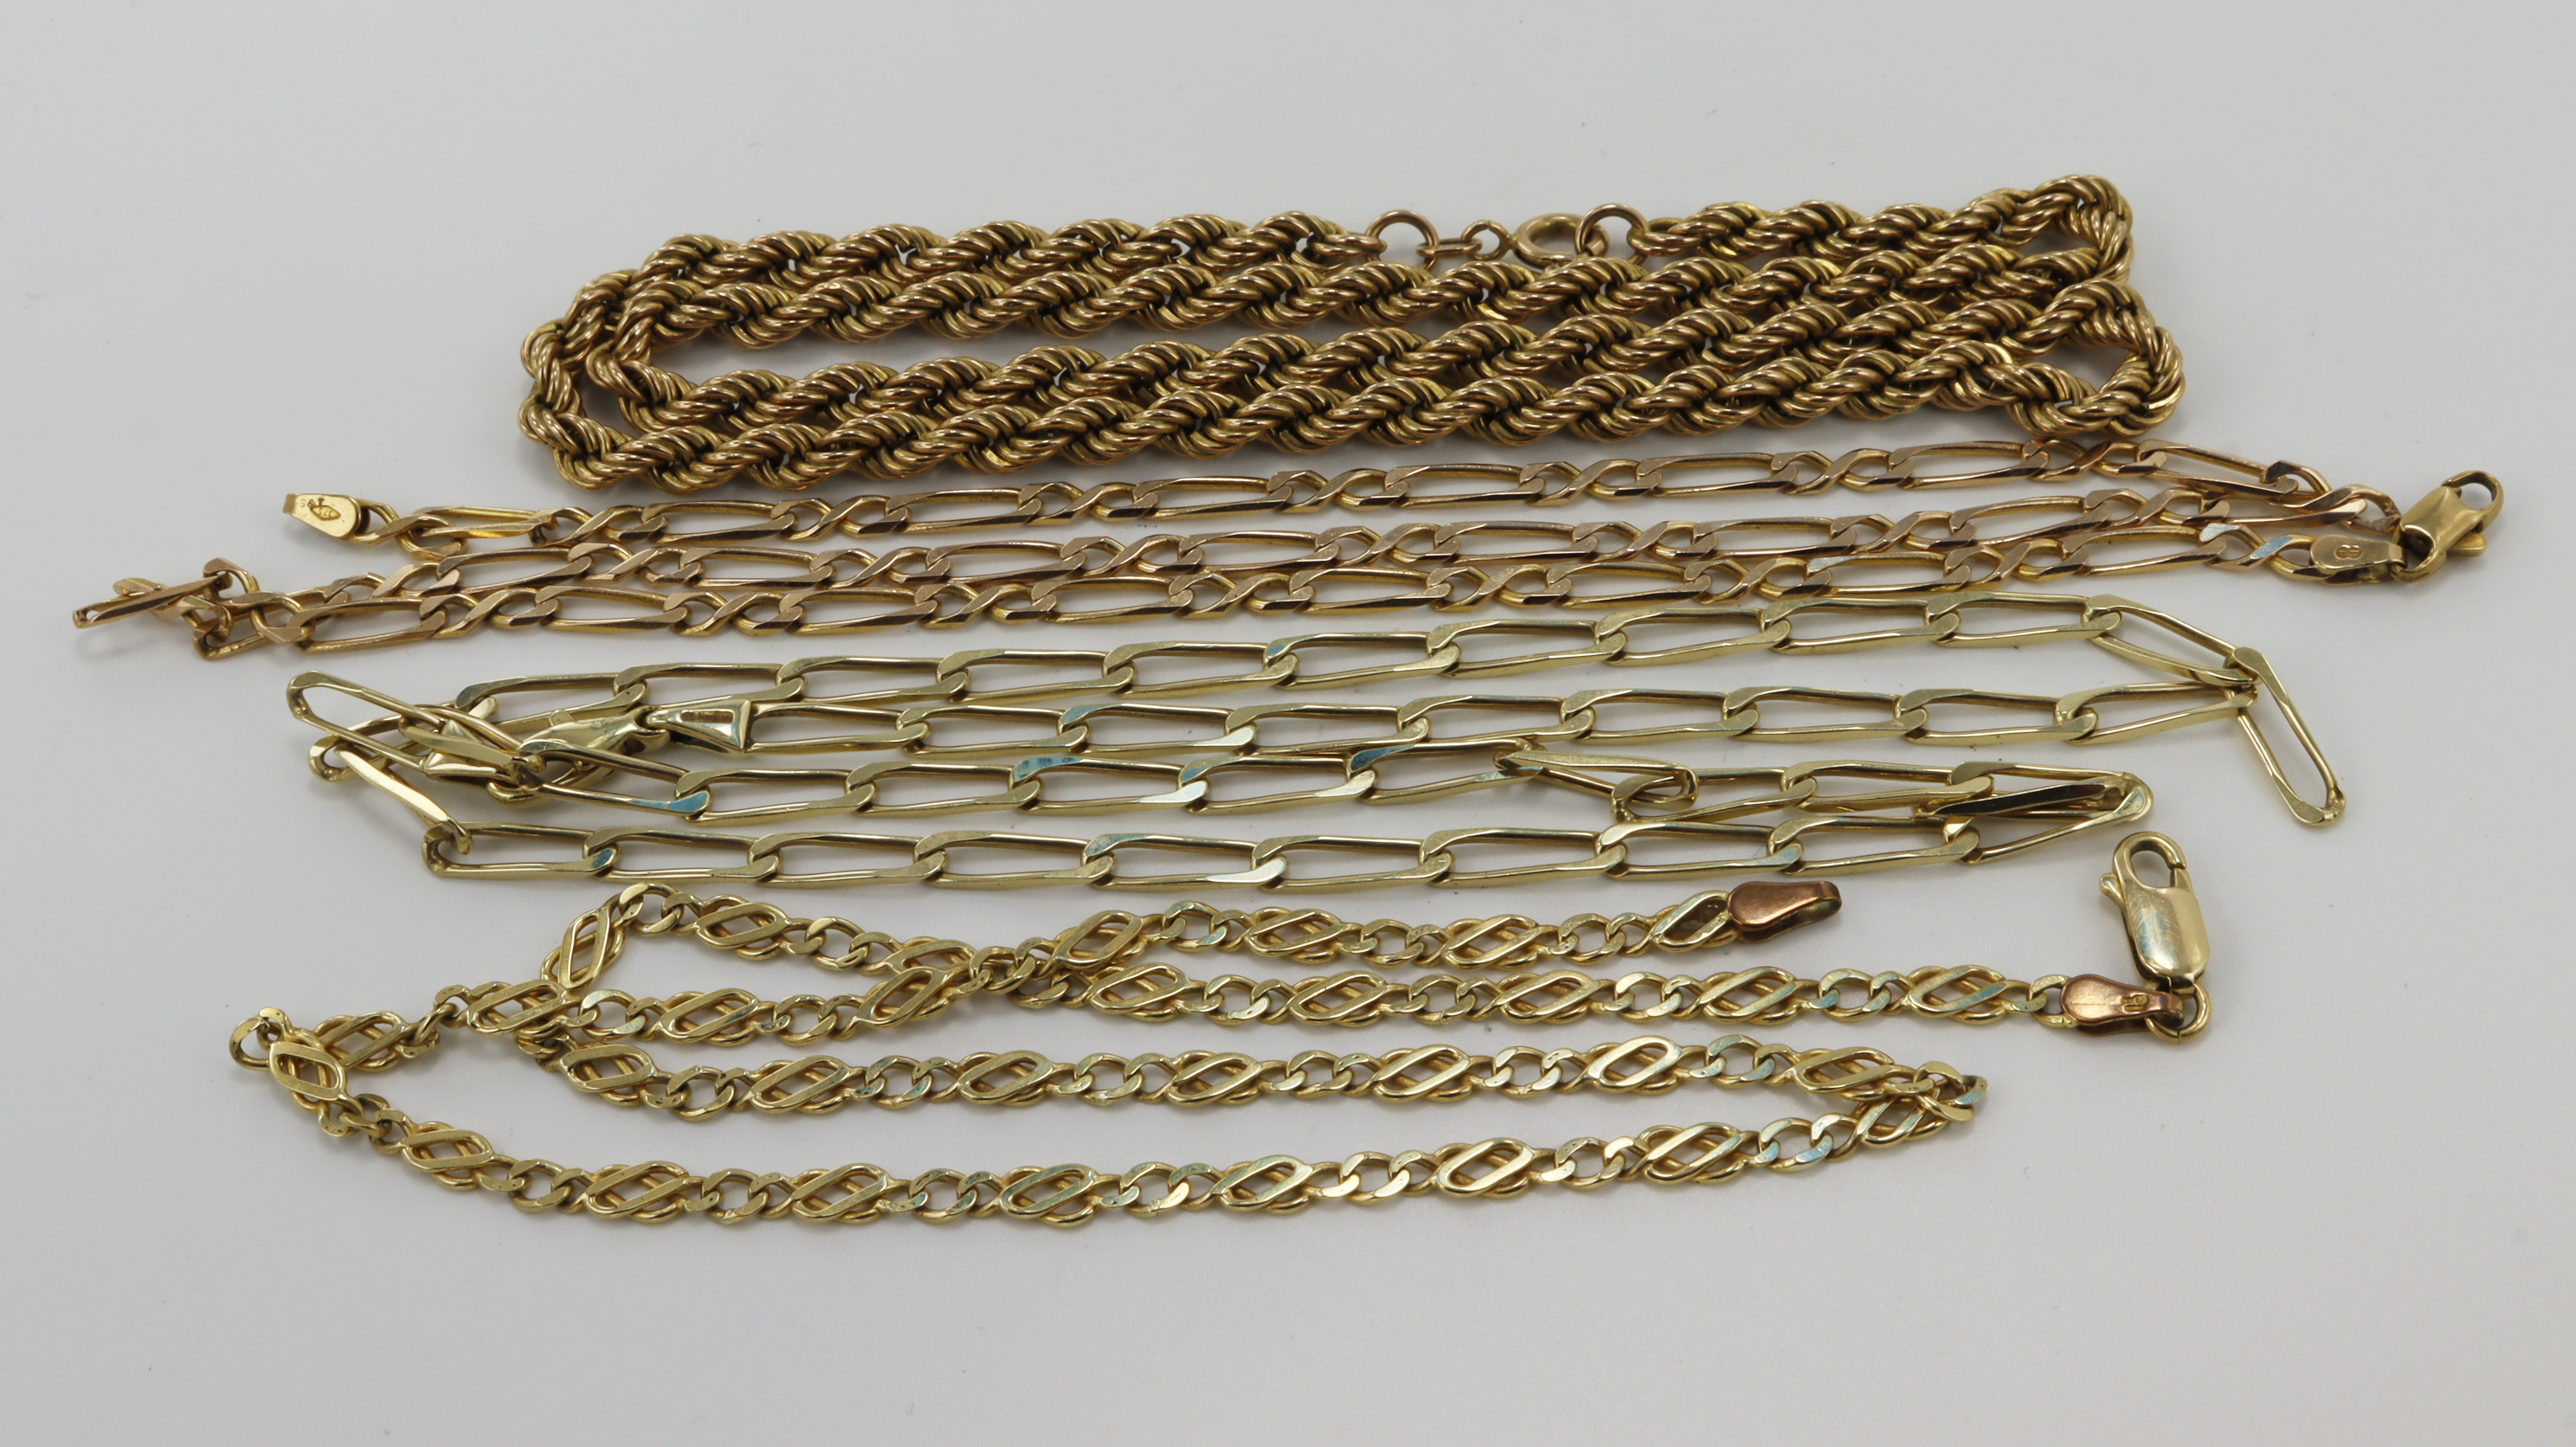 Four 9ct yellow gold chains, lengths 16.5", 18", 18.5", 20", total weight 34.5g.